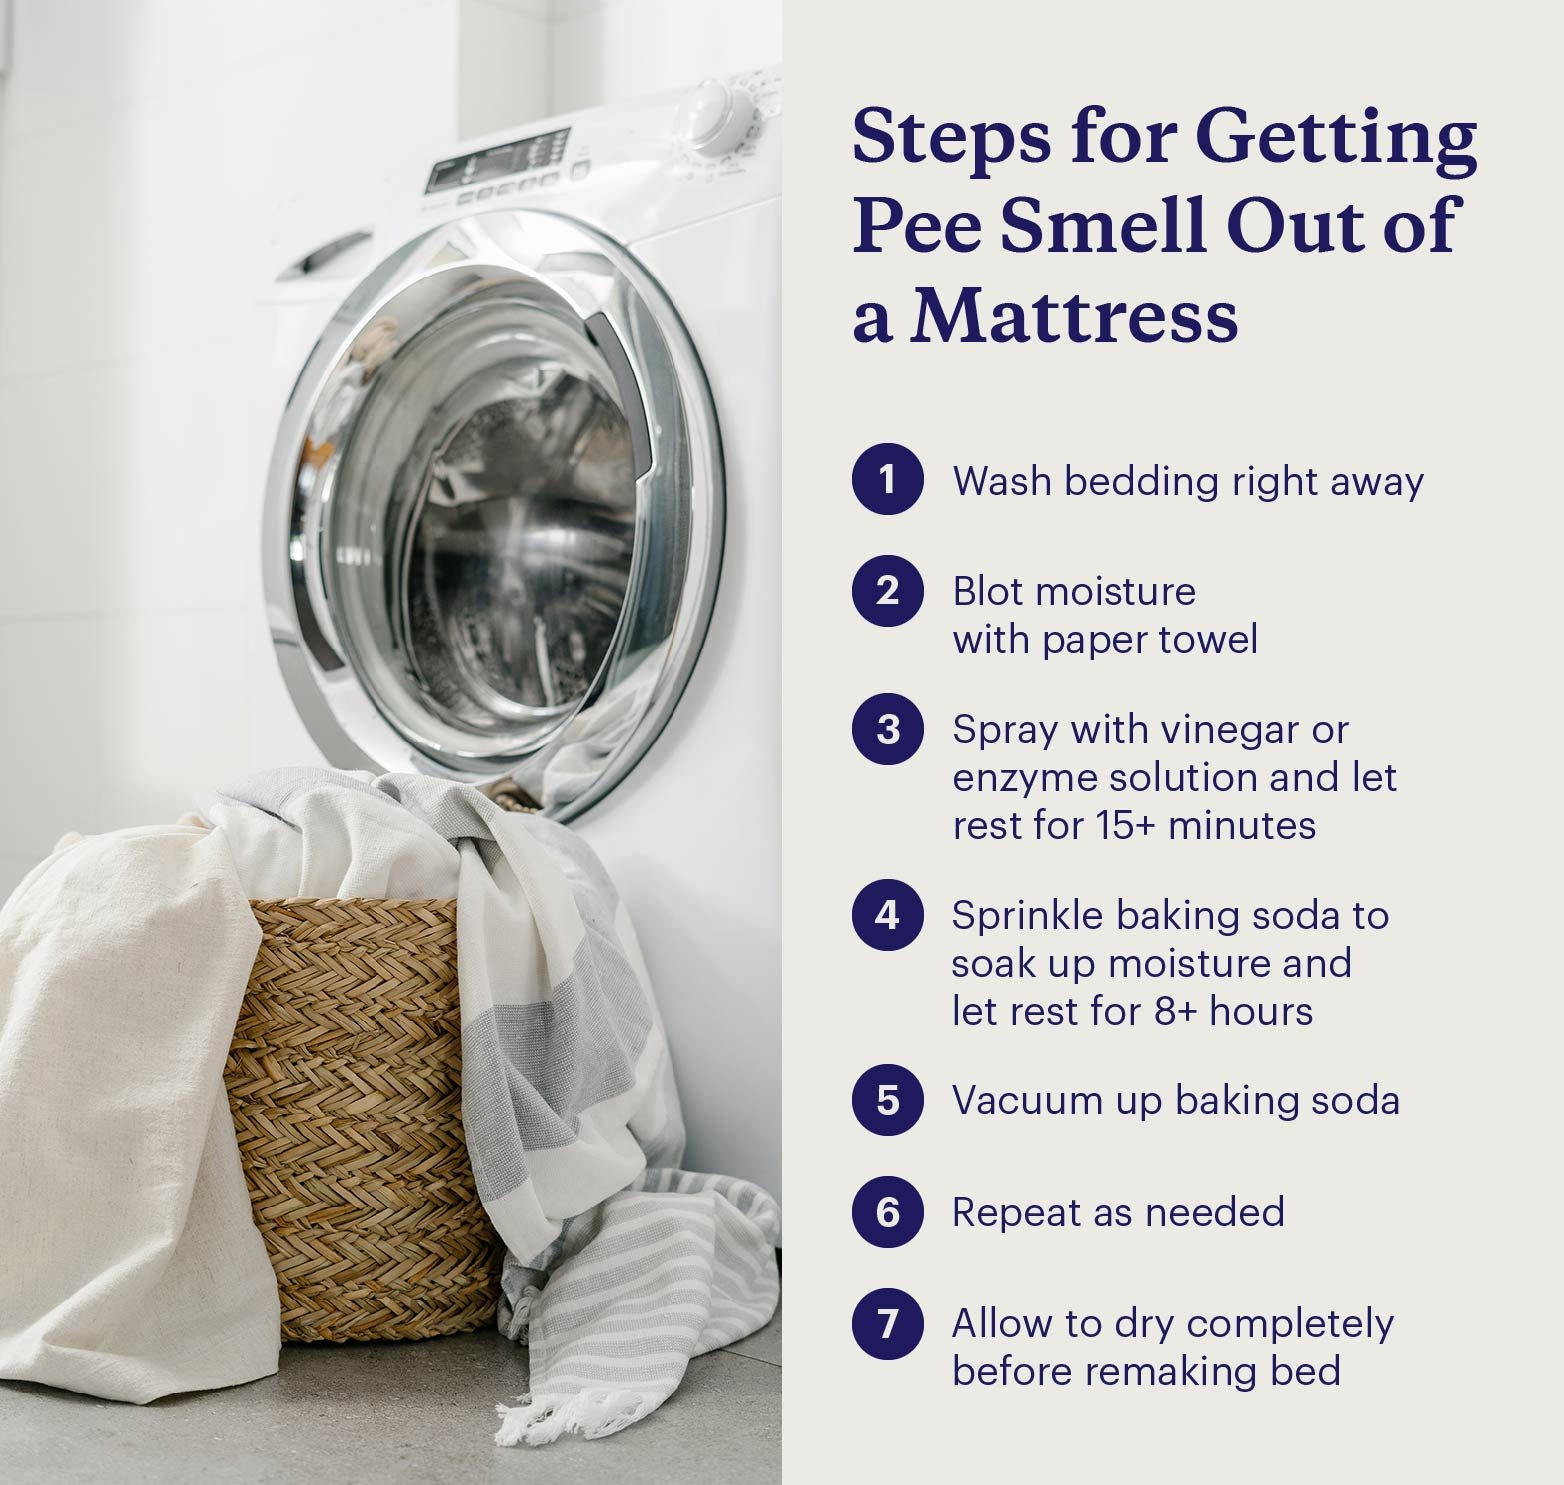 How to Get Pee Out of a Mattress in 5 Easy Steps